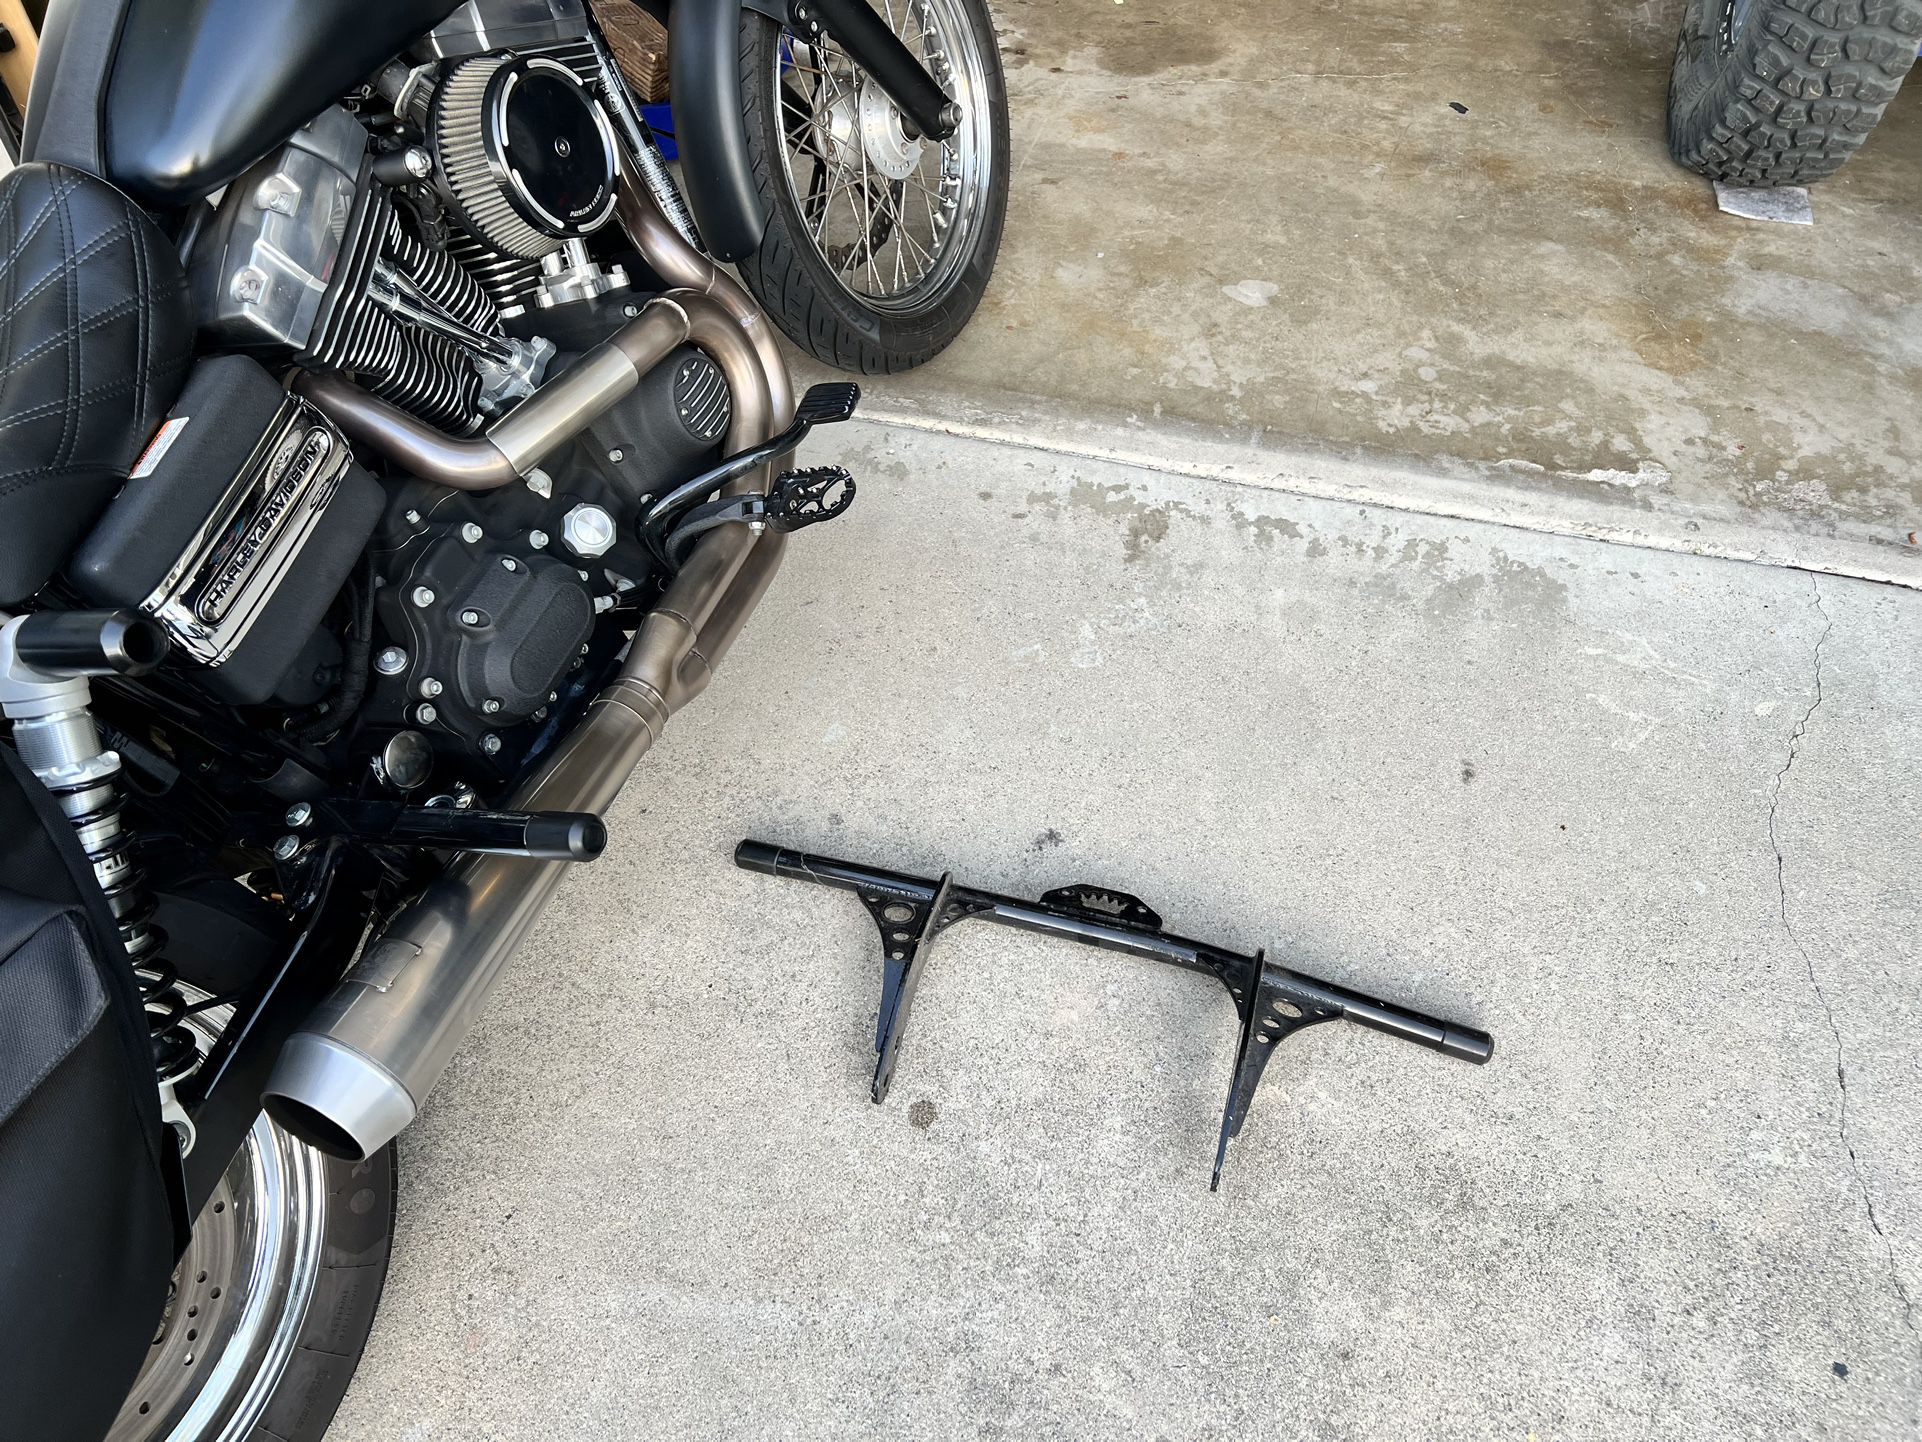 FRONT AND REAR BUNGKING CRASH BARS DYNA